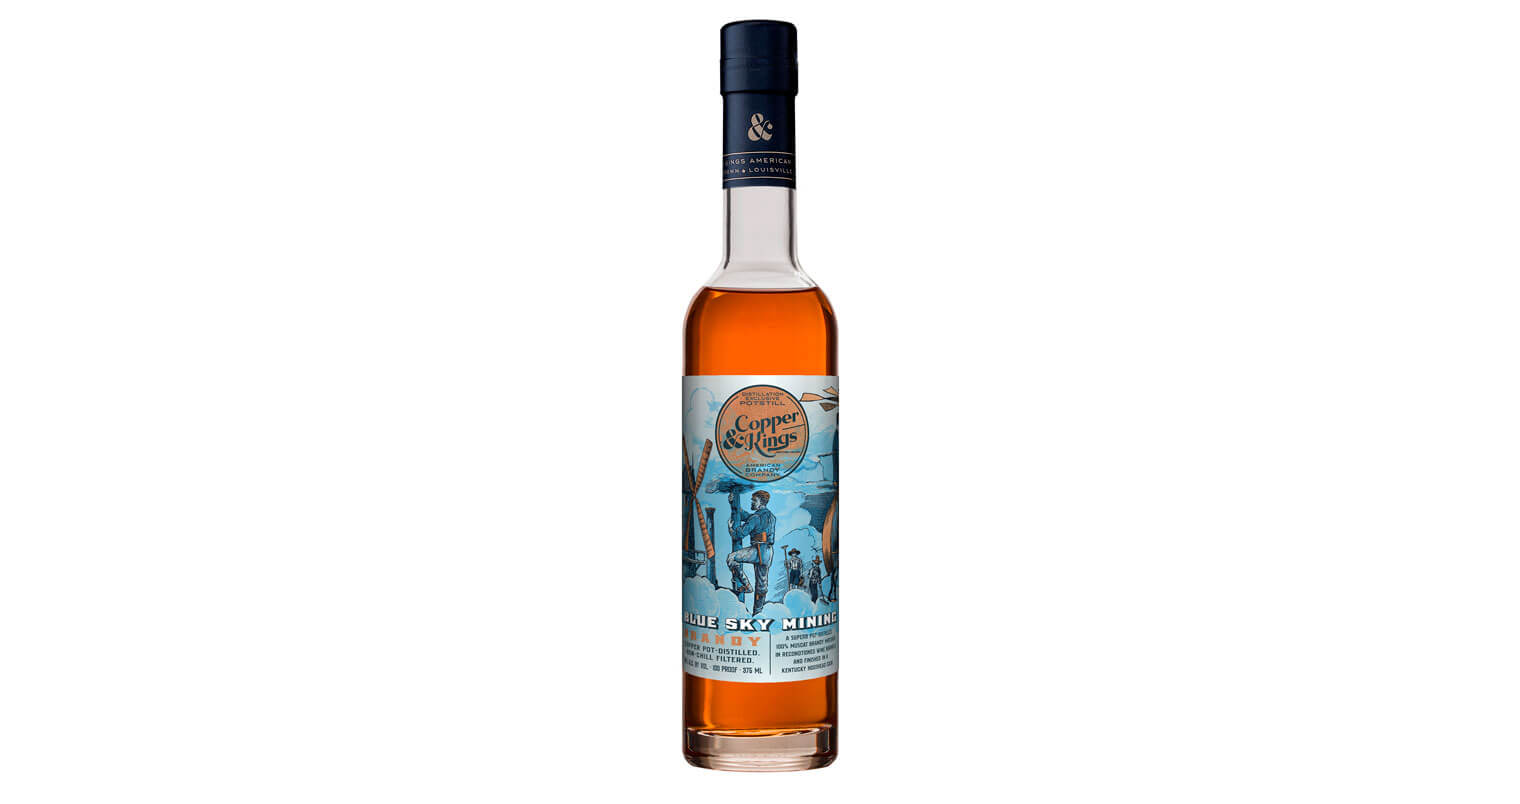 Copper & Kings Launches Blue Sky Mining Brandy, featured image